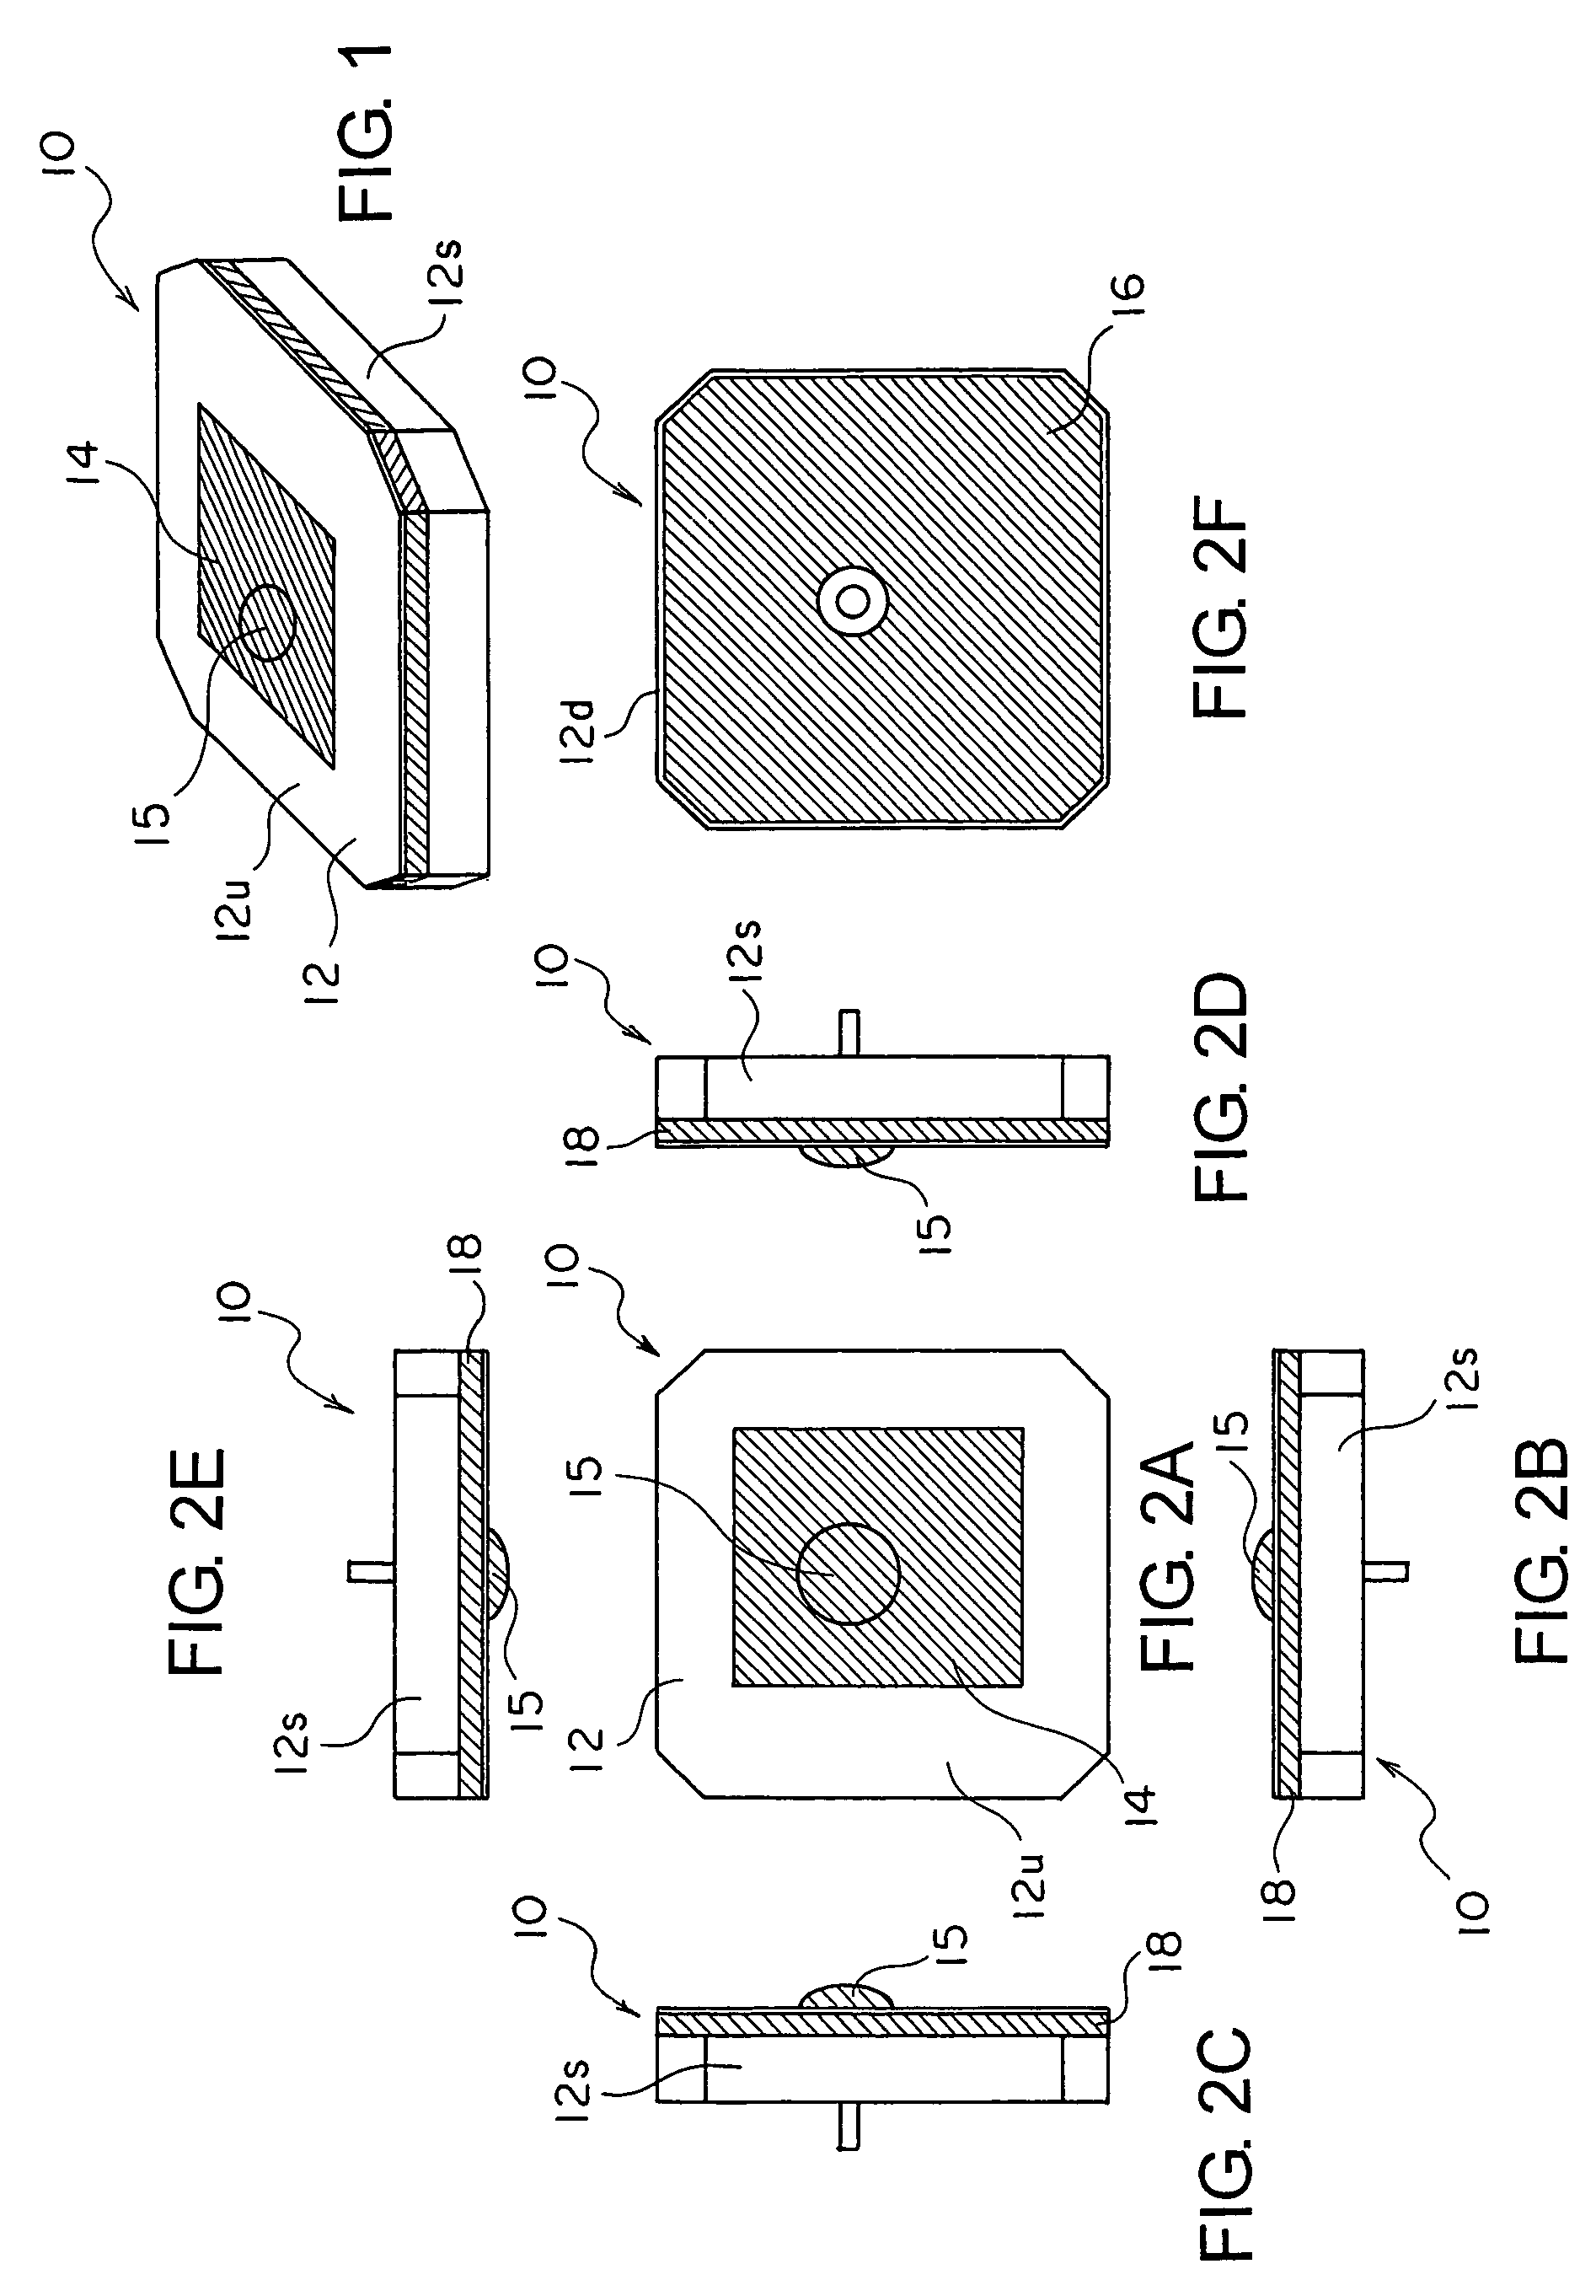 Patch antenna having a non-feeding element formed on a side surface of a dielectric